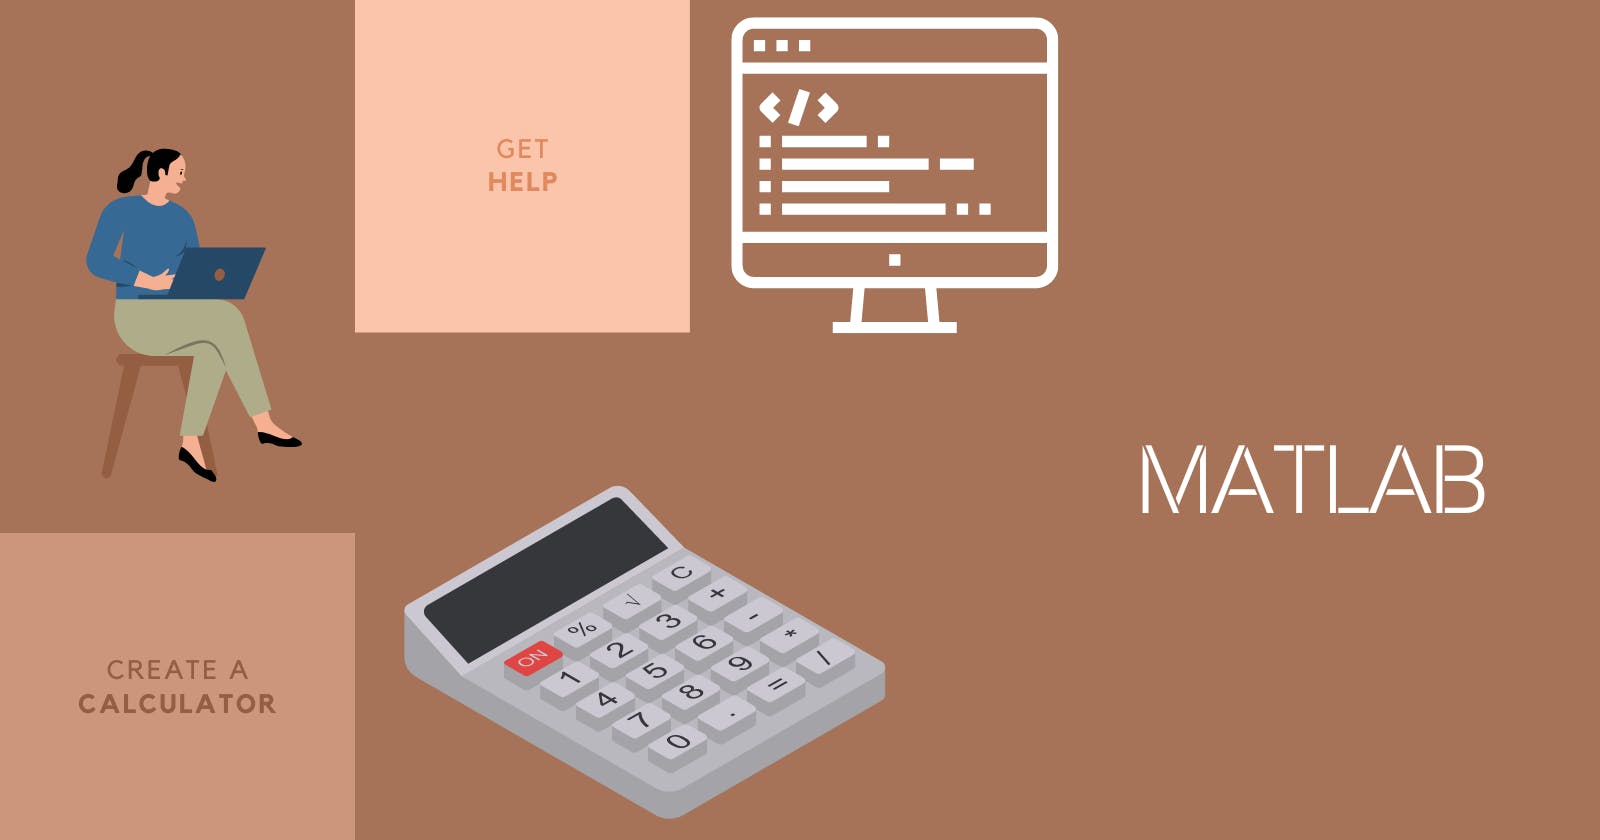 Use MATLAB as a Calculator and Discover how to get Help